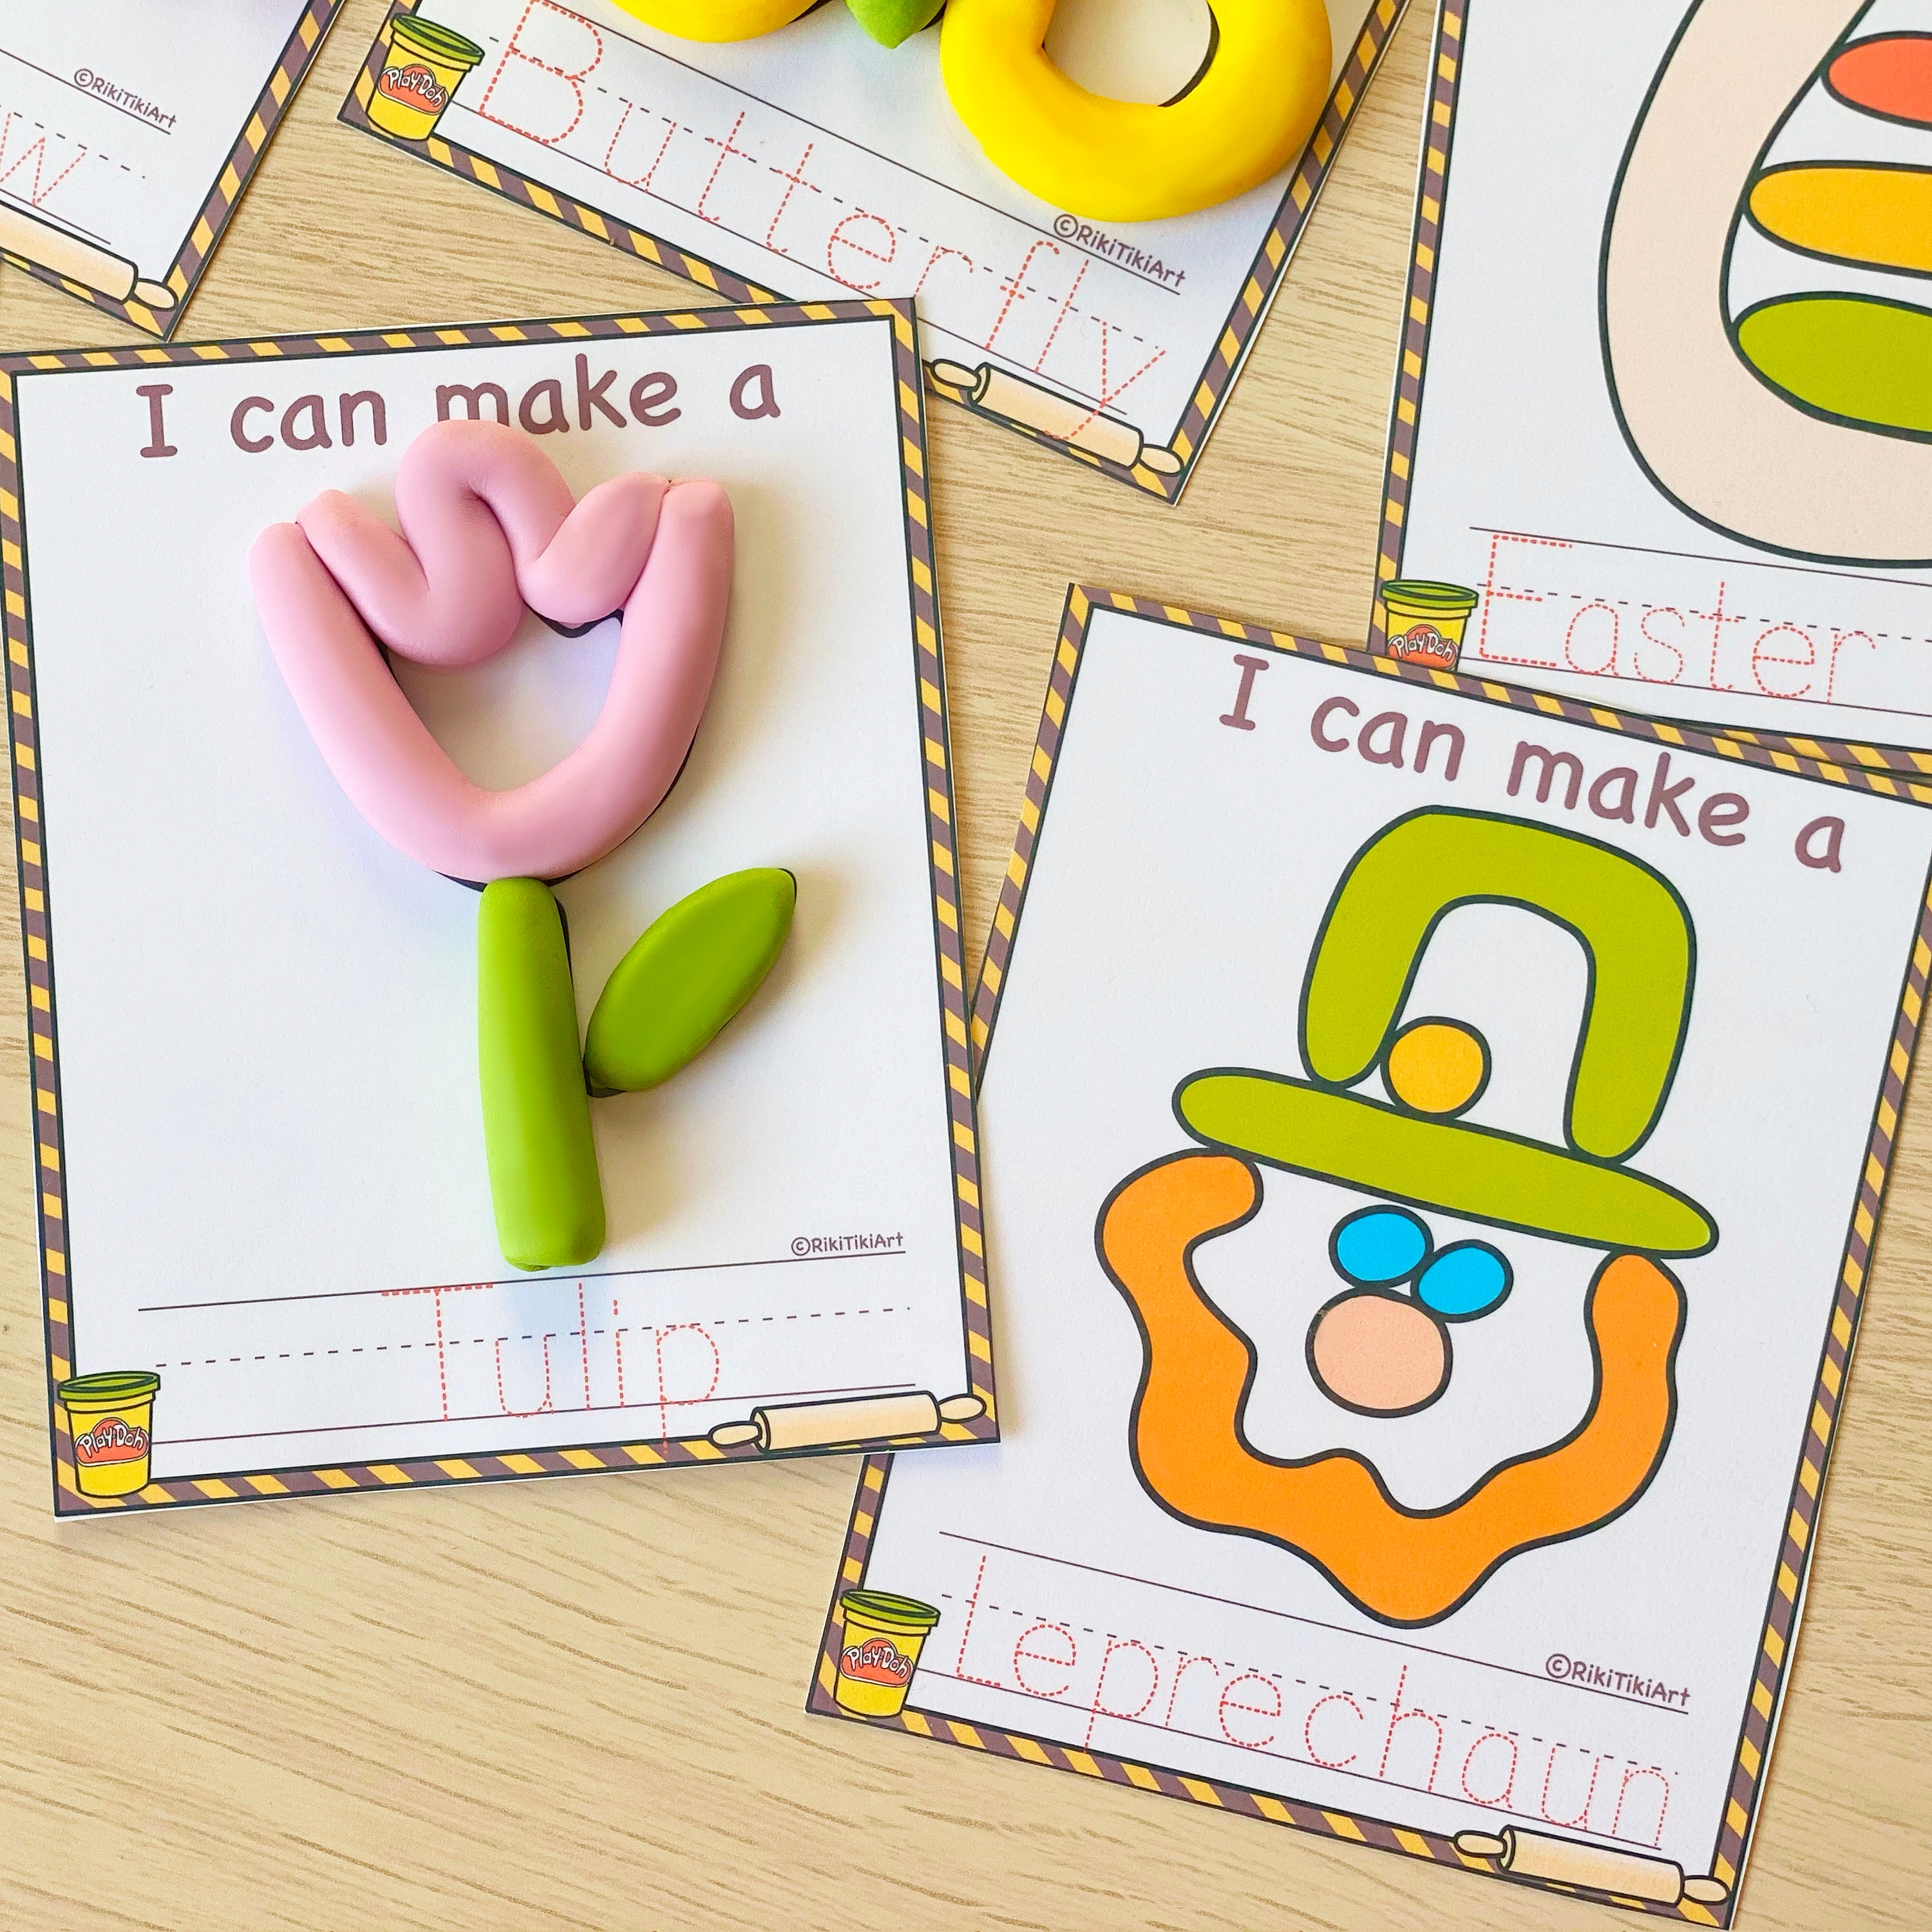 Play Doh - Tools, Recipes & Free Printable Mats - Preschool & Childcare  Center Serving Akron, OH